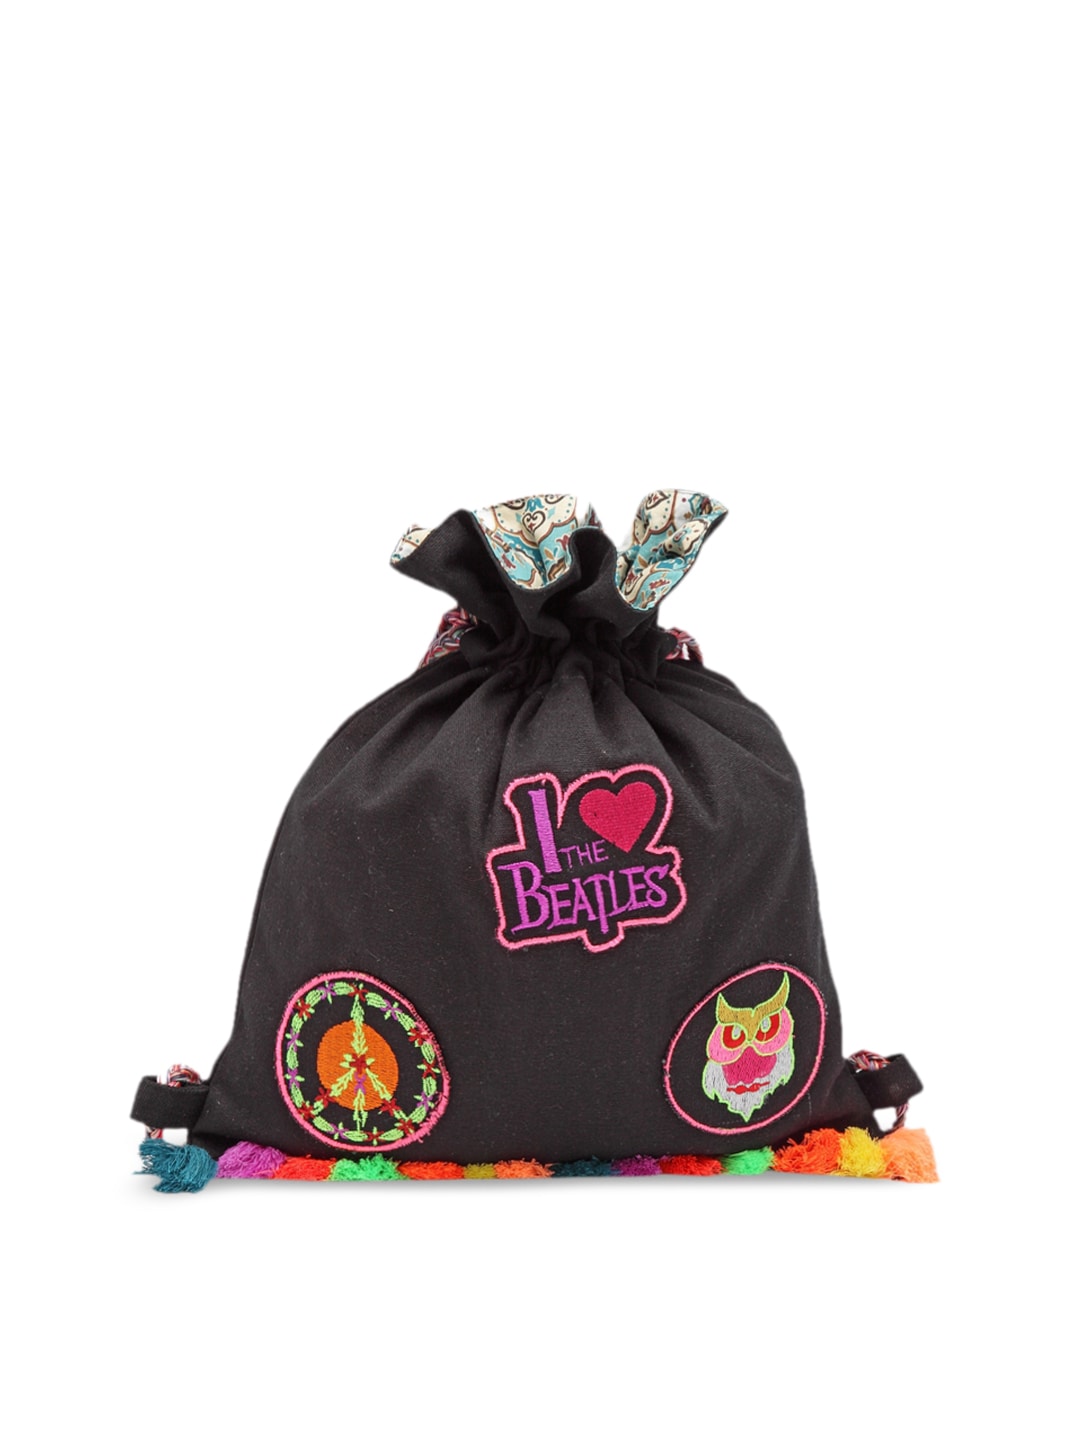 The House of Tara Women Black Appliqued Backpack Price in India